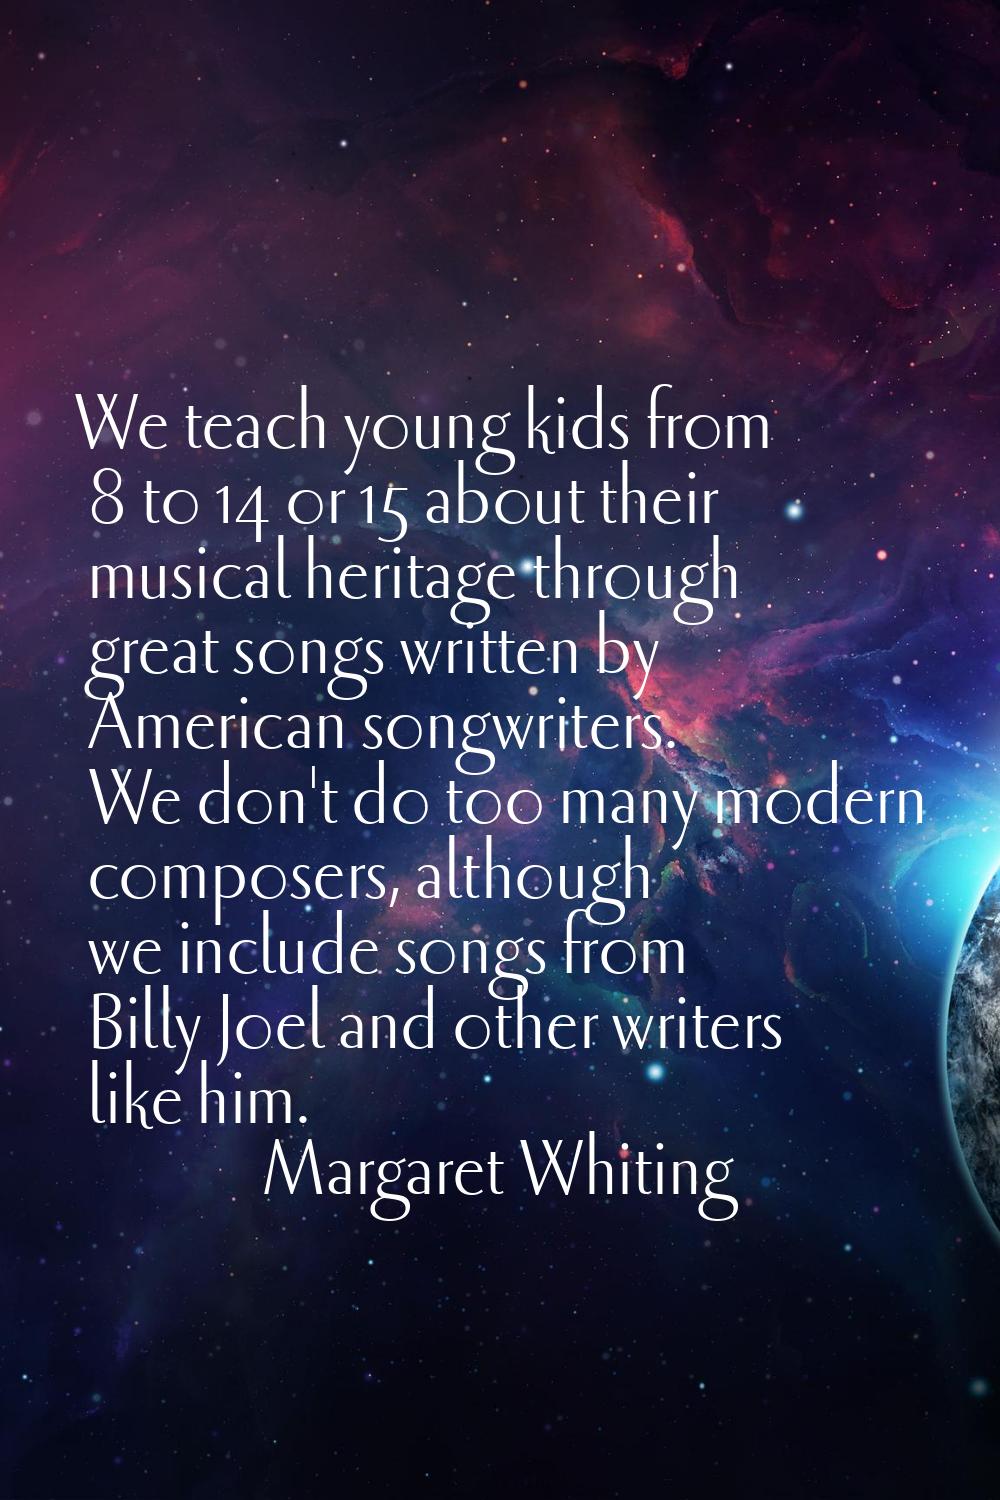 We teach young kids from 8 to 14 or 15 about their musical heritage through great songs written by 